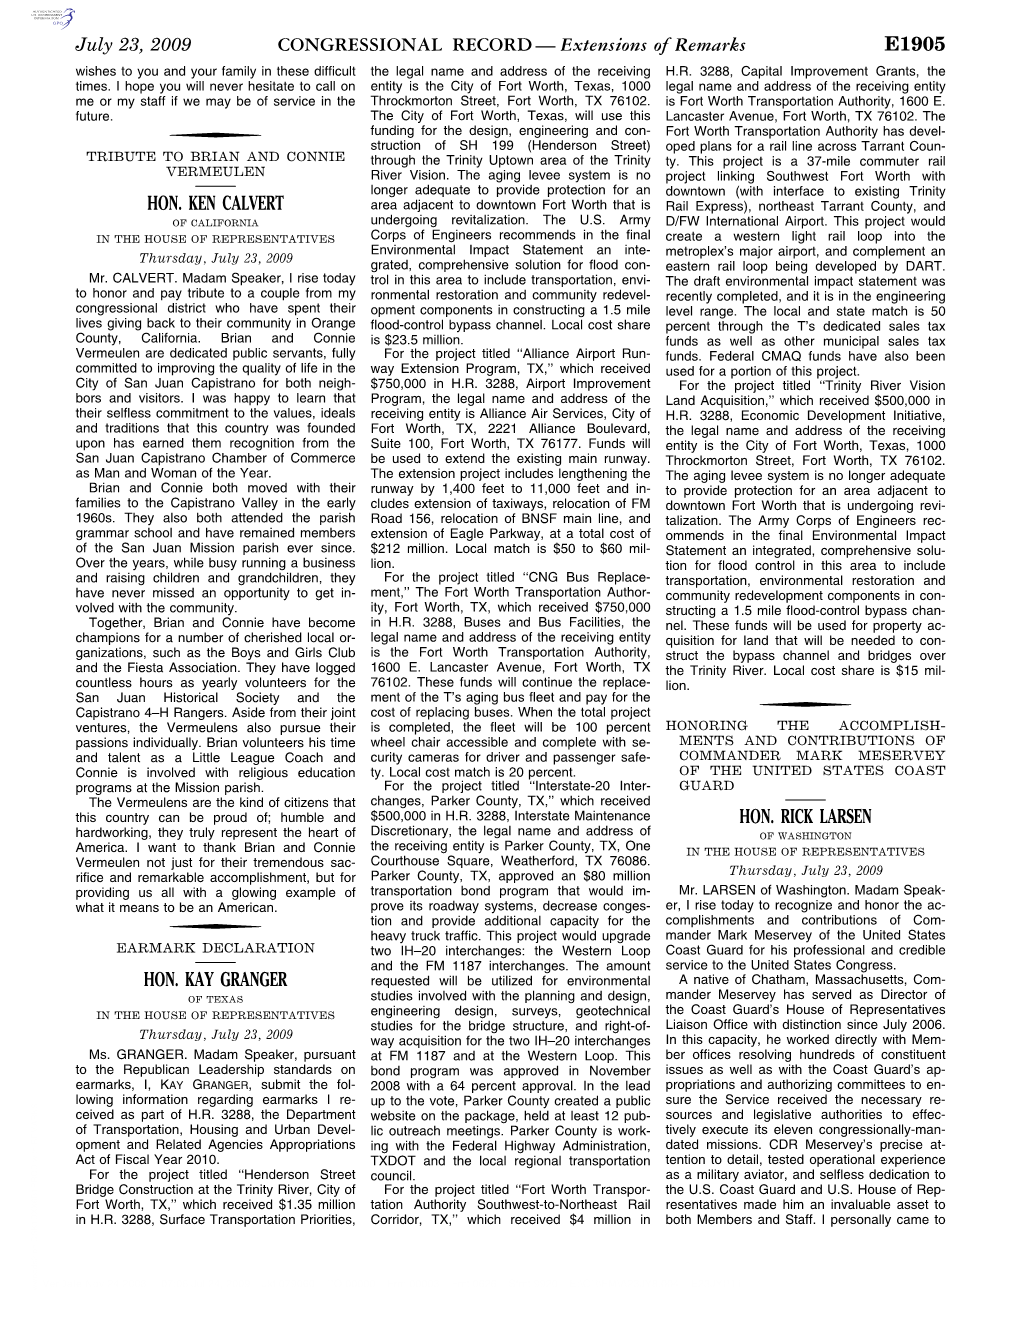 CONGRESSIONAL RECORD— Extensions of Remarks E1905 HON